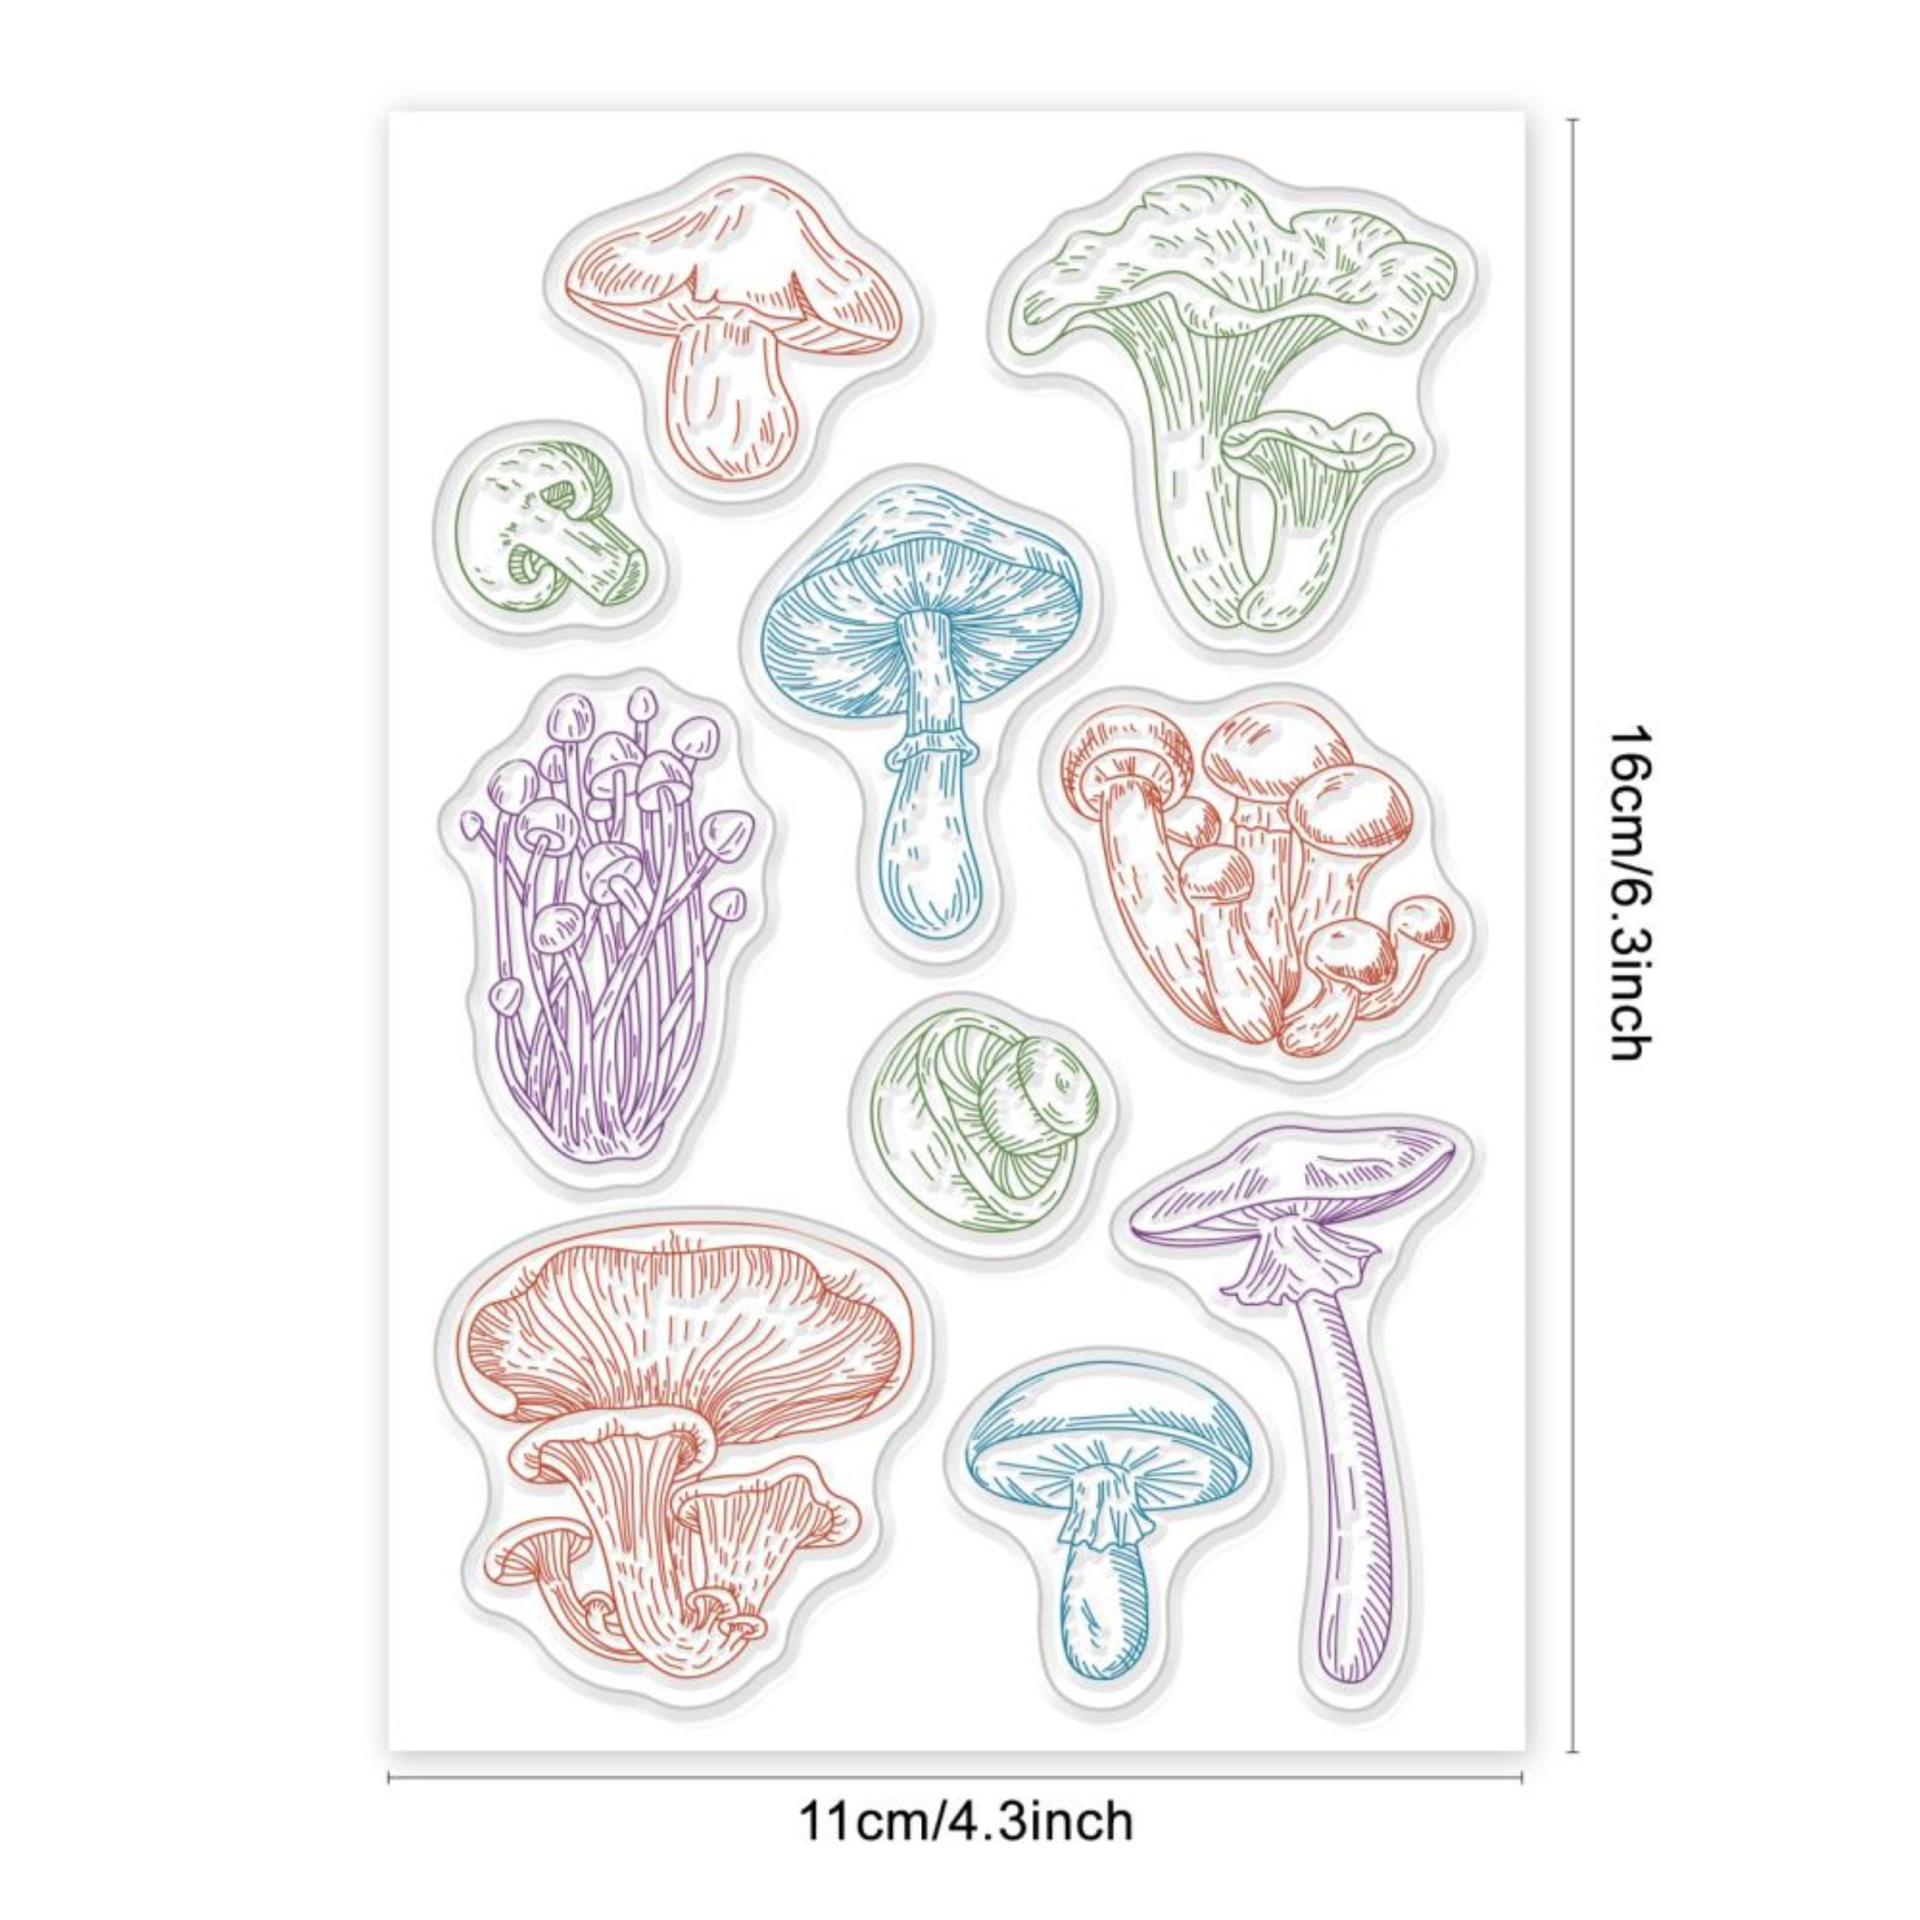 Mushroom Stamp - Silicone Cling Stamp - Texture Embossing Stamp - Journaling, Scrapbooking